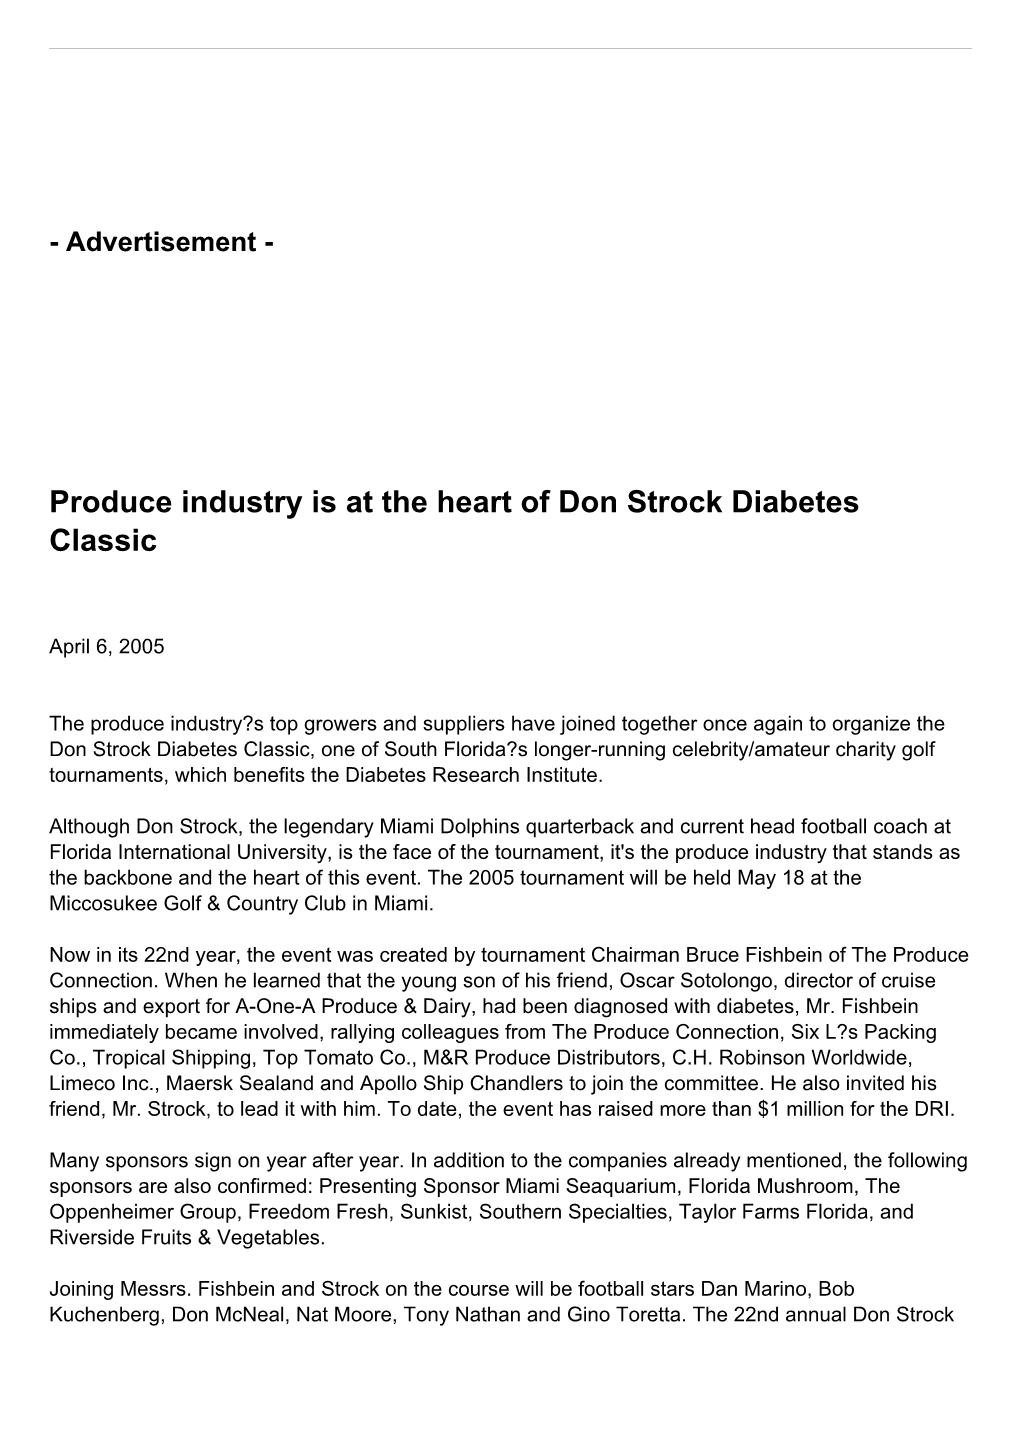 Produce Industry Is at the Heart of Don Strock Diabetes Classic